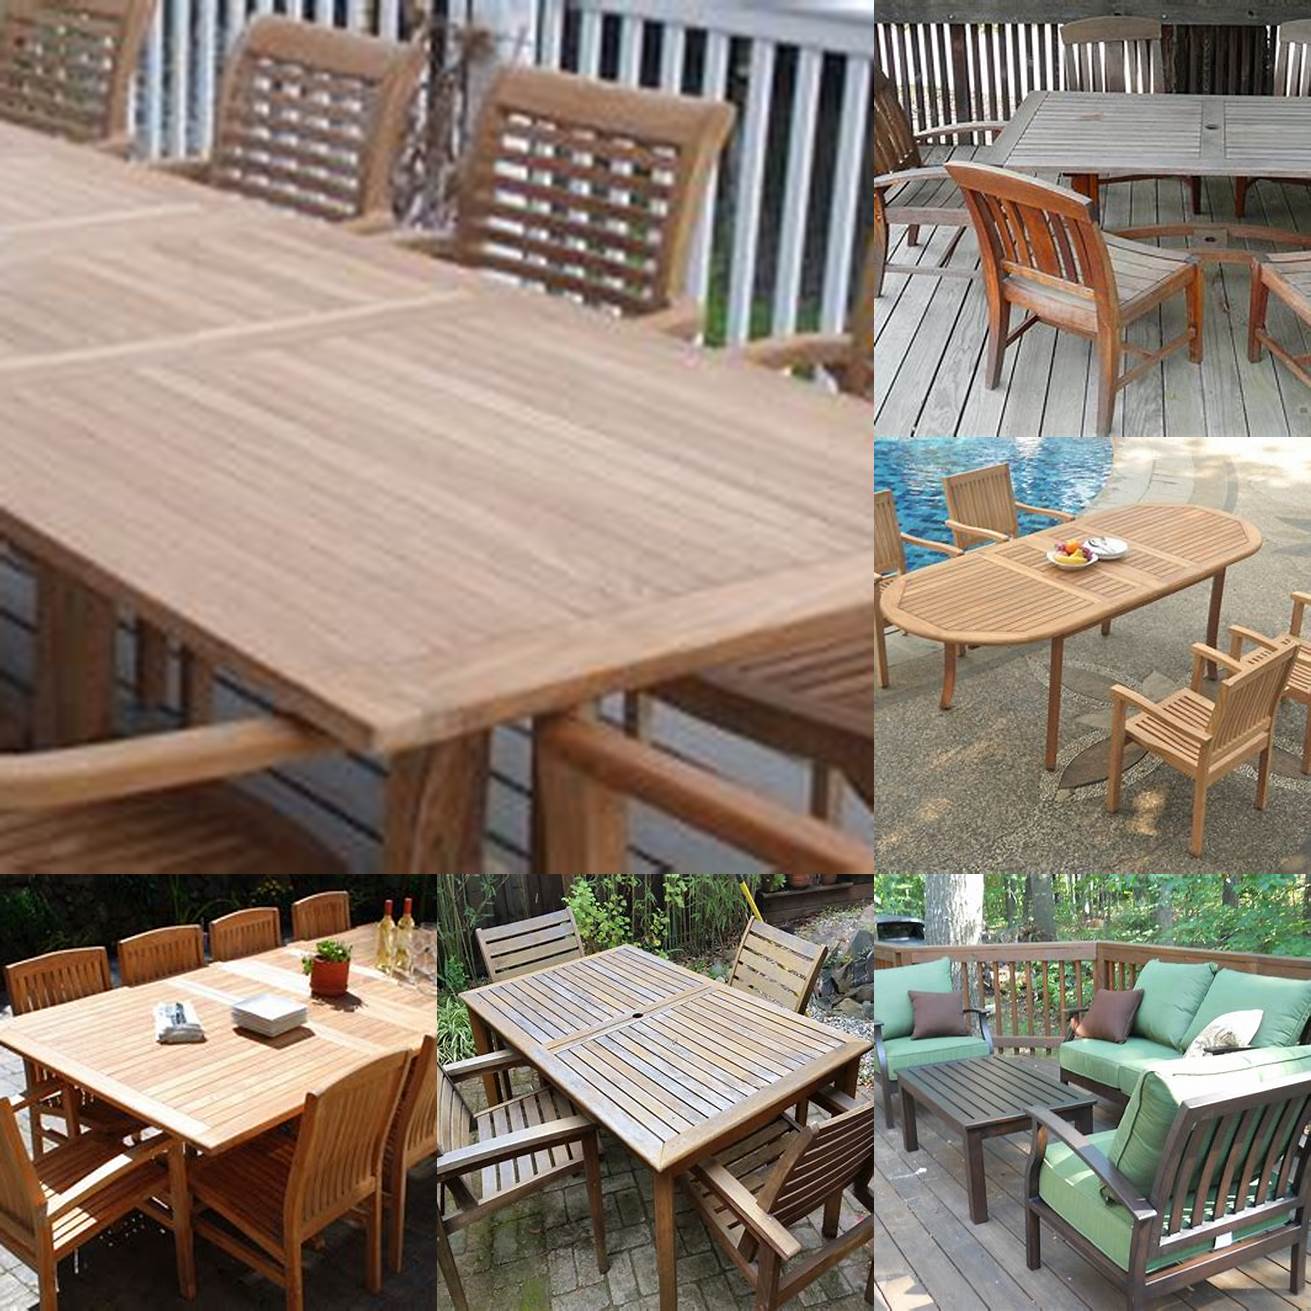 A picture of plantation teak furniture being used on a deck